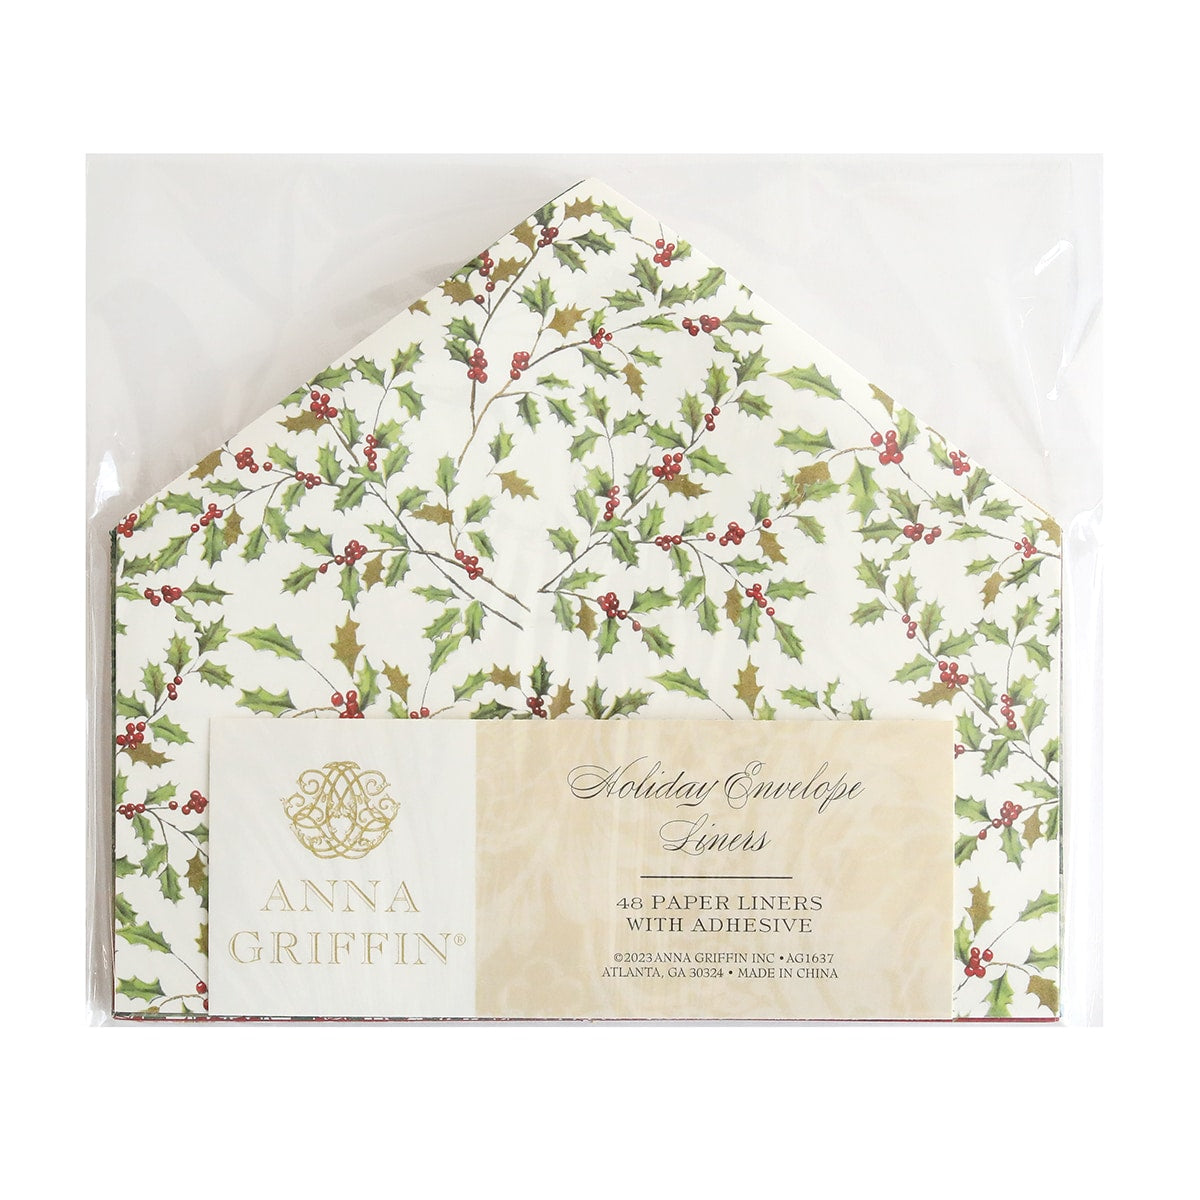 Anna griffin holiday envelope liners.